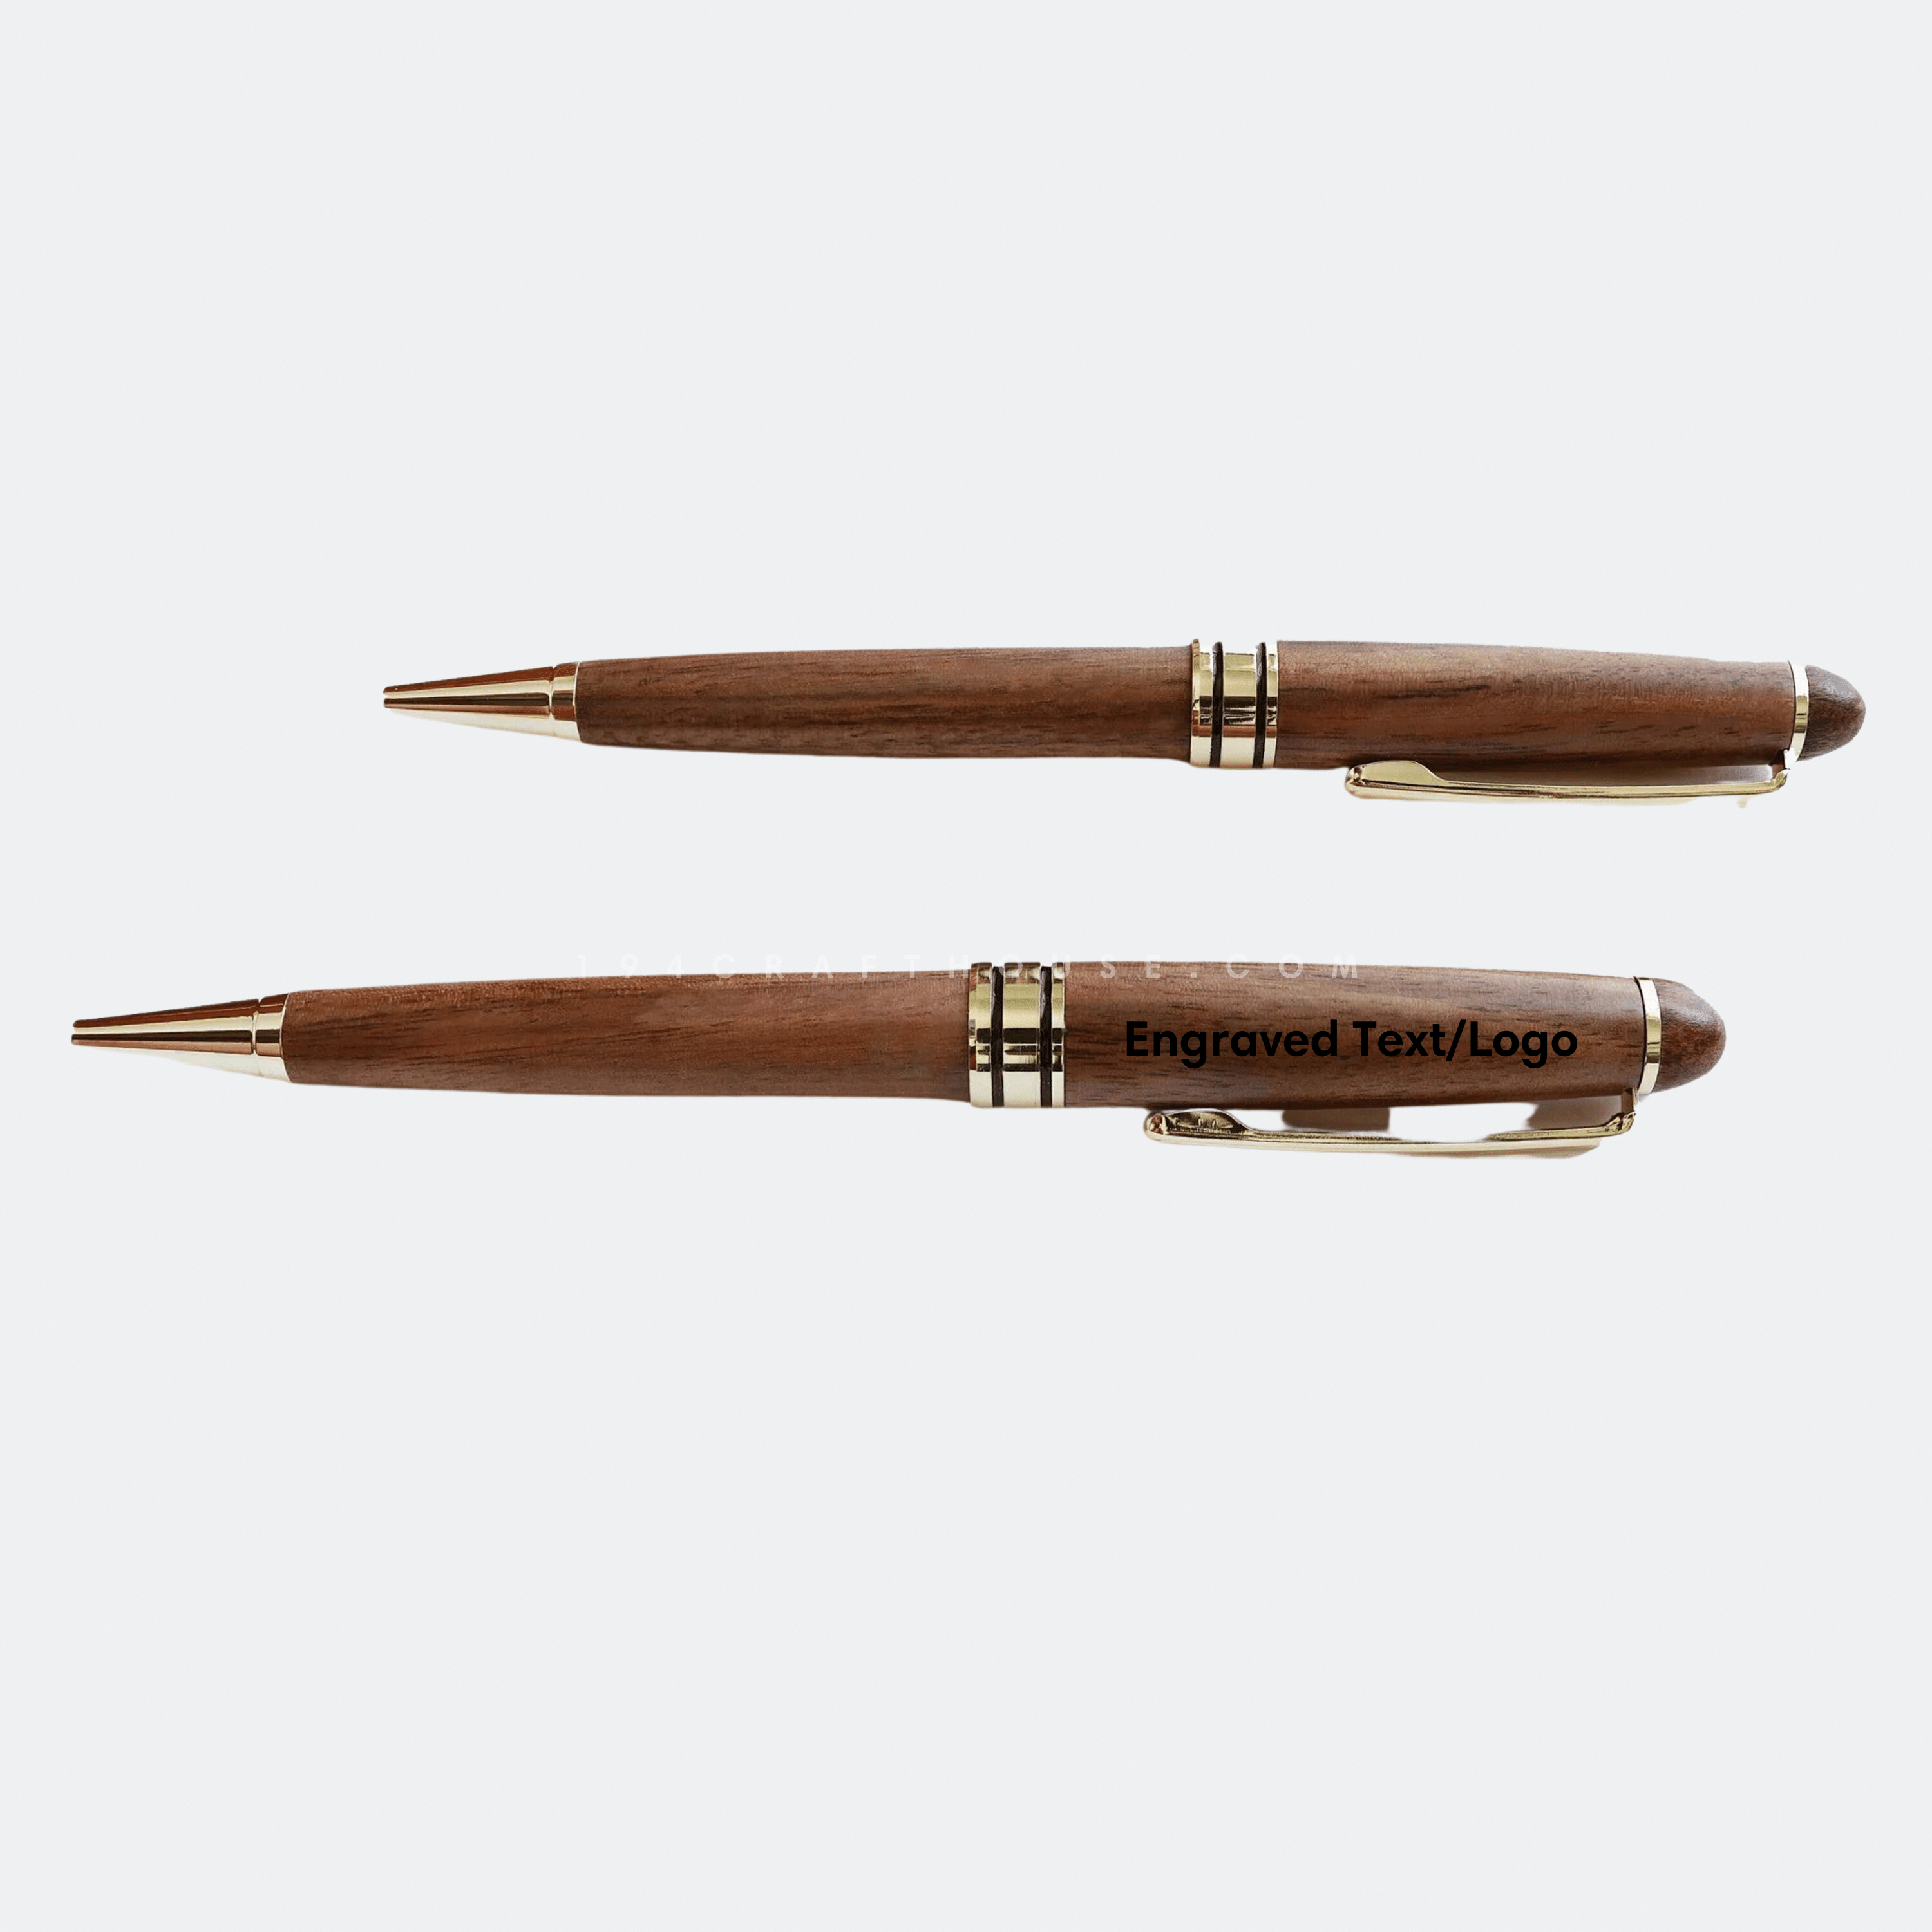 Giftana Personalized Pen with Name, Customized Pen with Box on Both, Brown  Body Metal Ballpoint Pen Gift for Official Usage, Gifts for Anniversary,  Teacher's Day Gifts, Birthday Gifts for Everyone : Amazon.in: